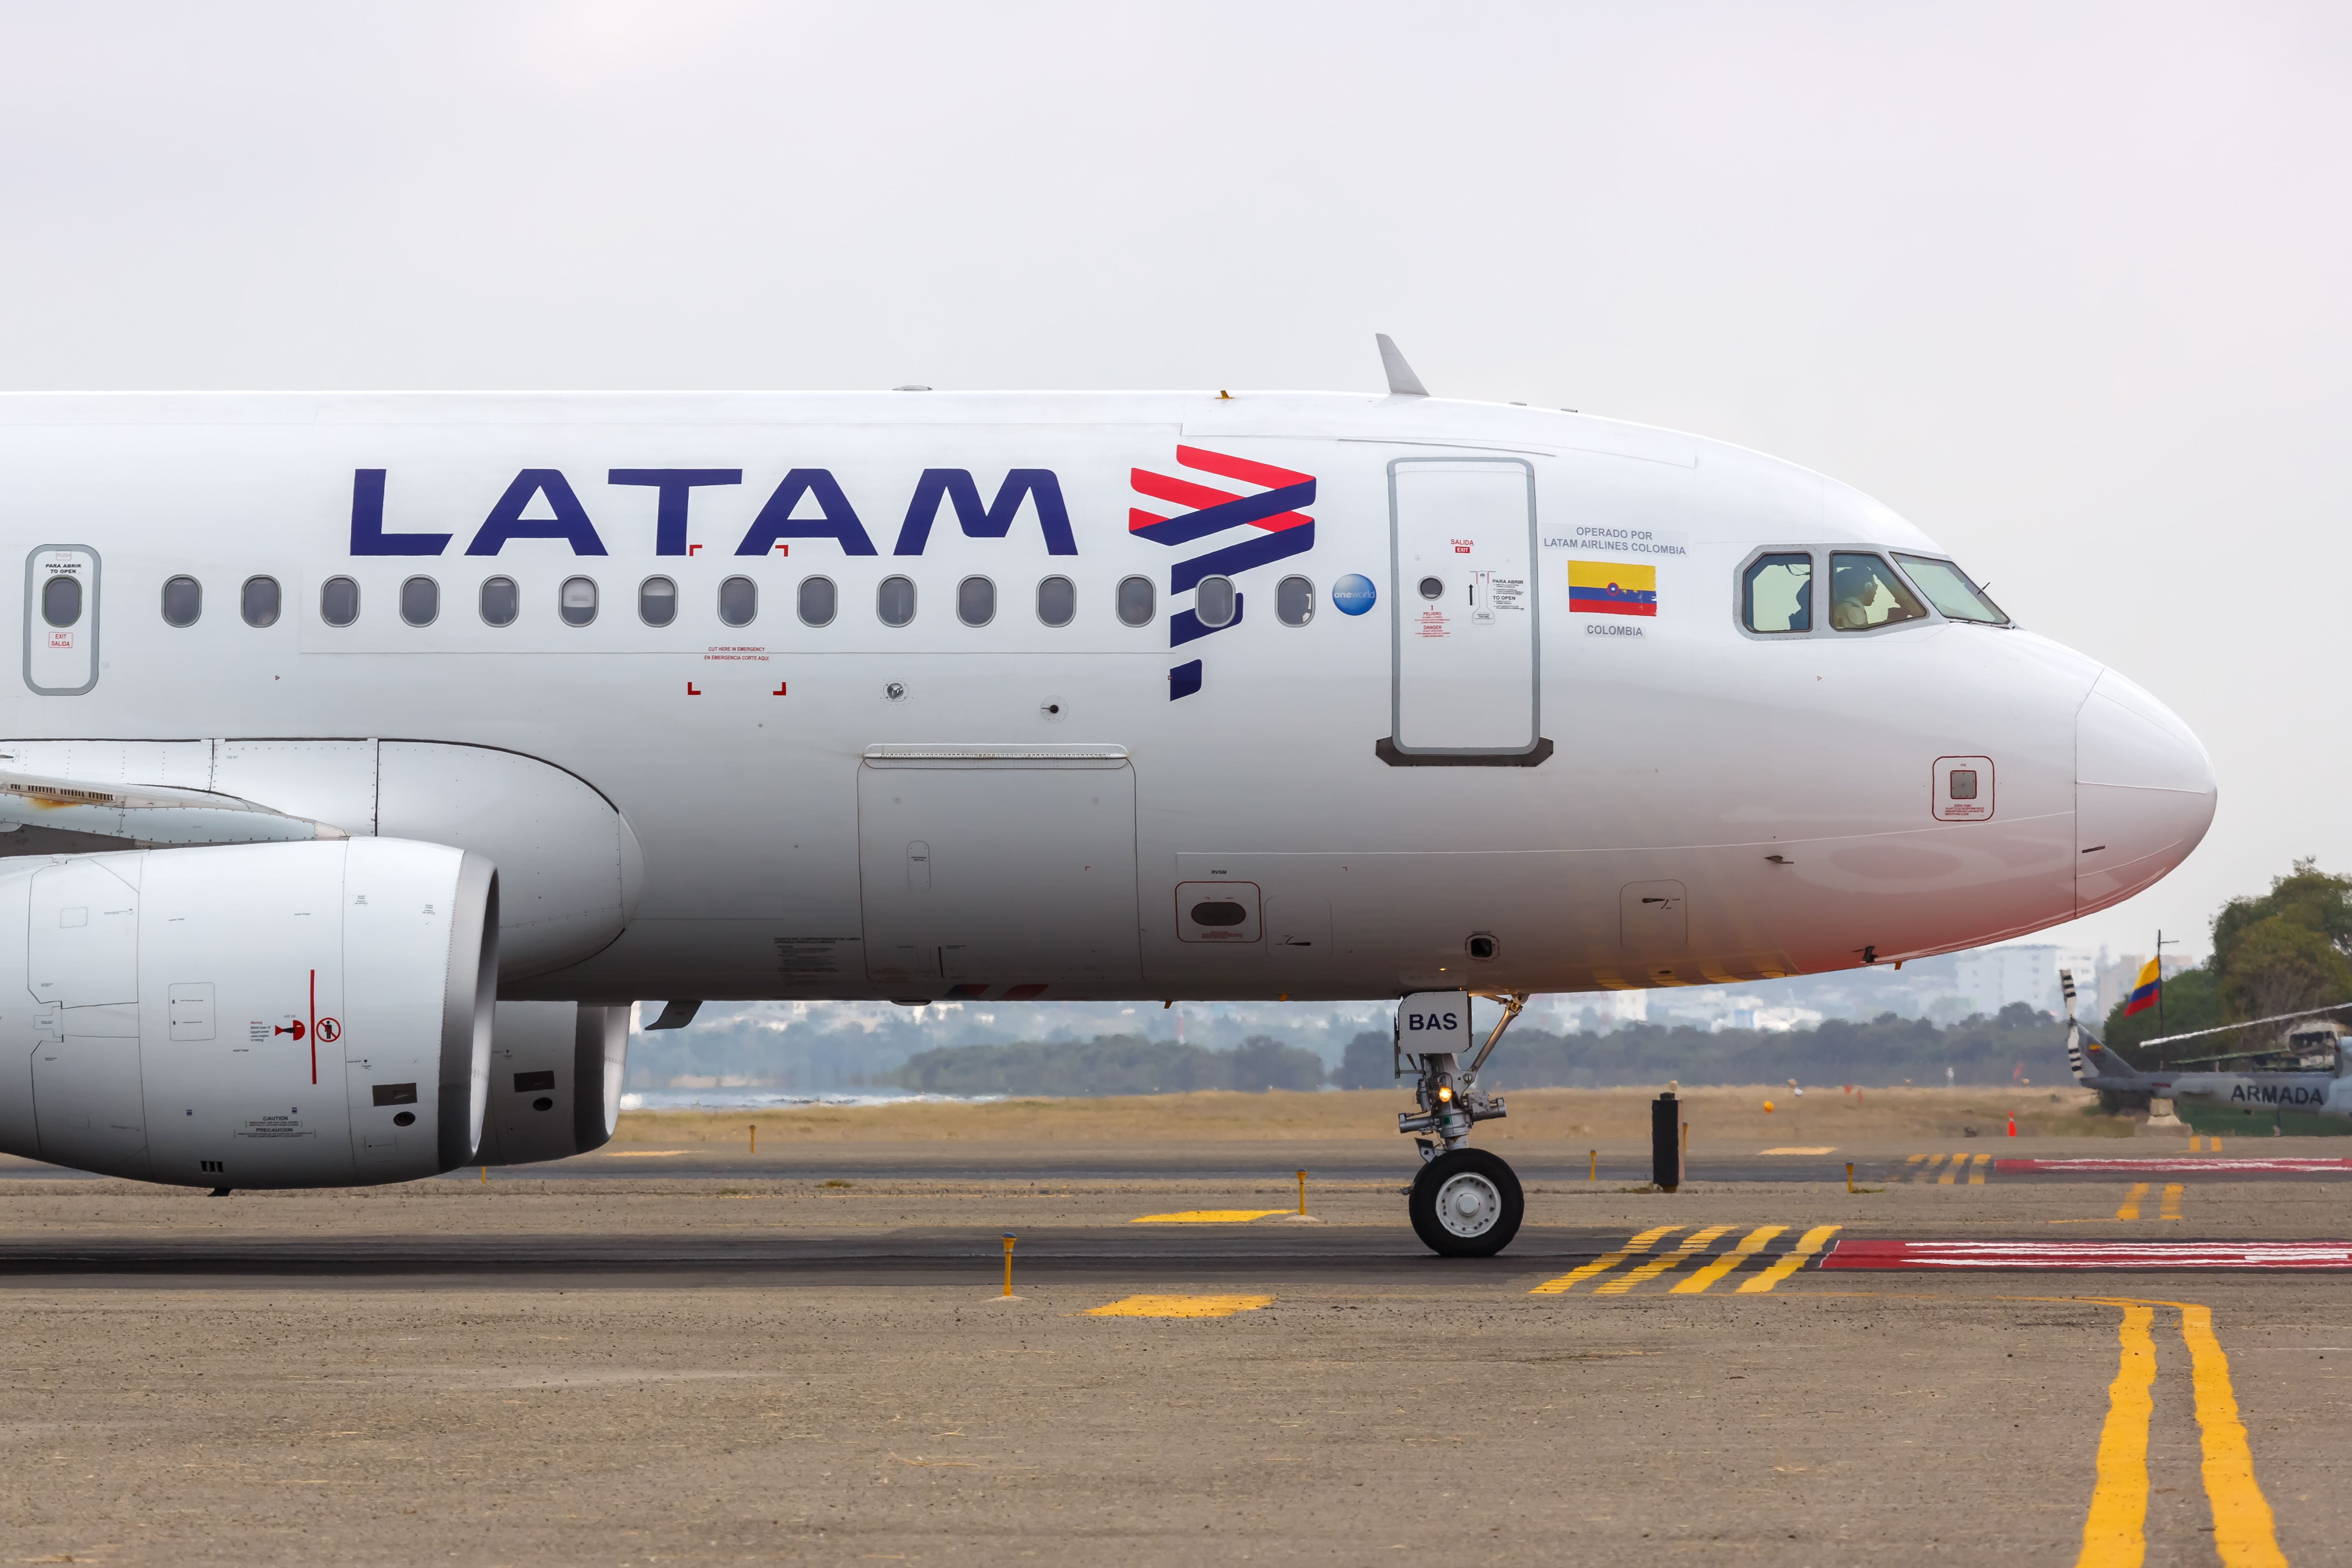 LATAM Airbus A320 airplane Cartagena airport (CTG) in Colombia.